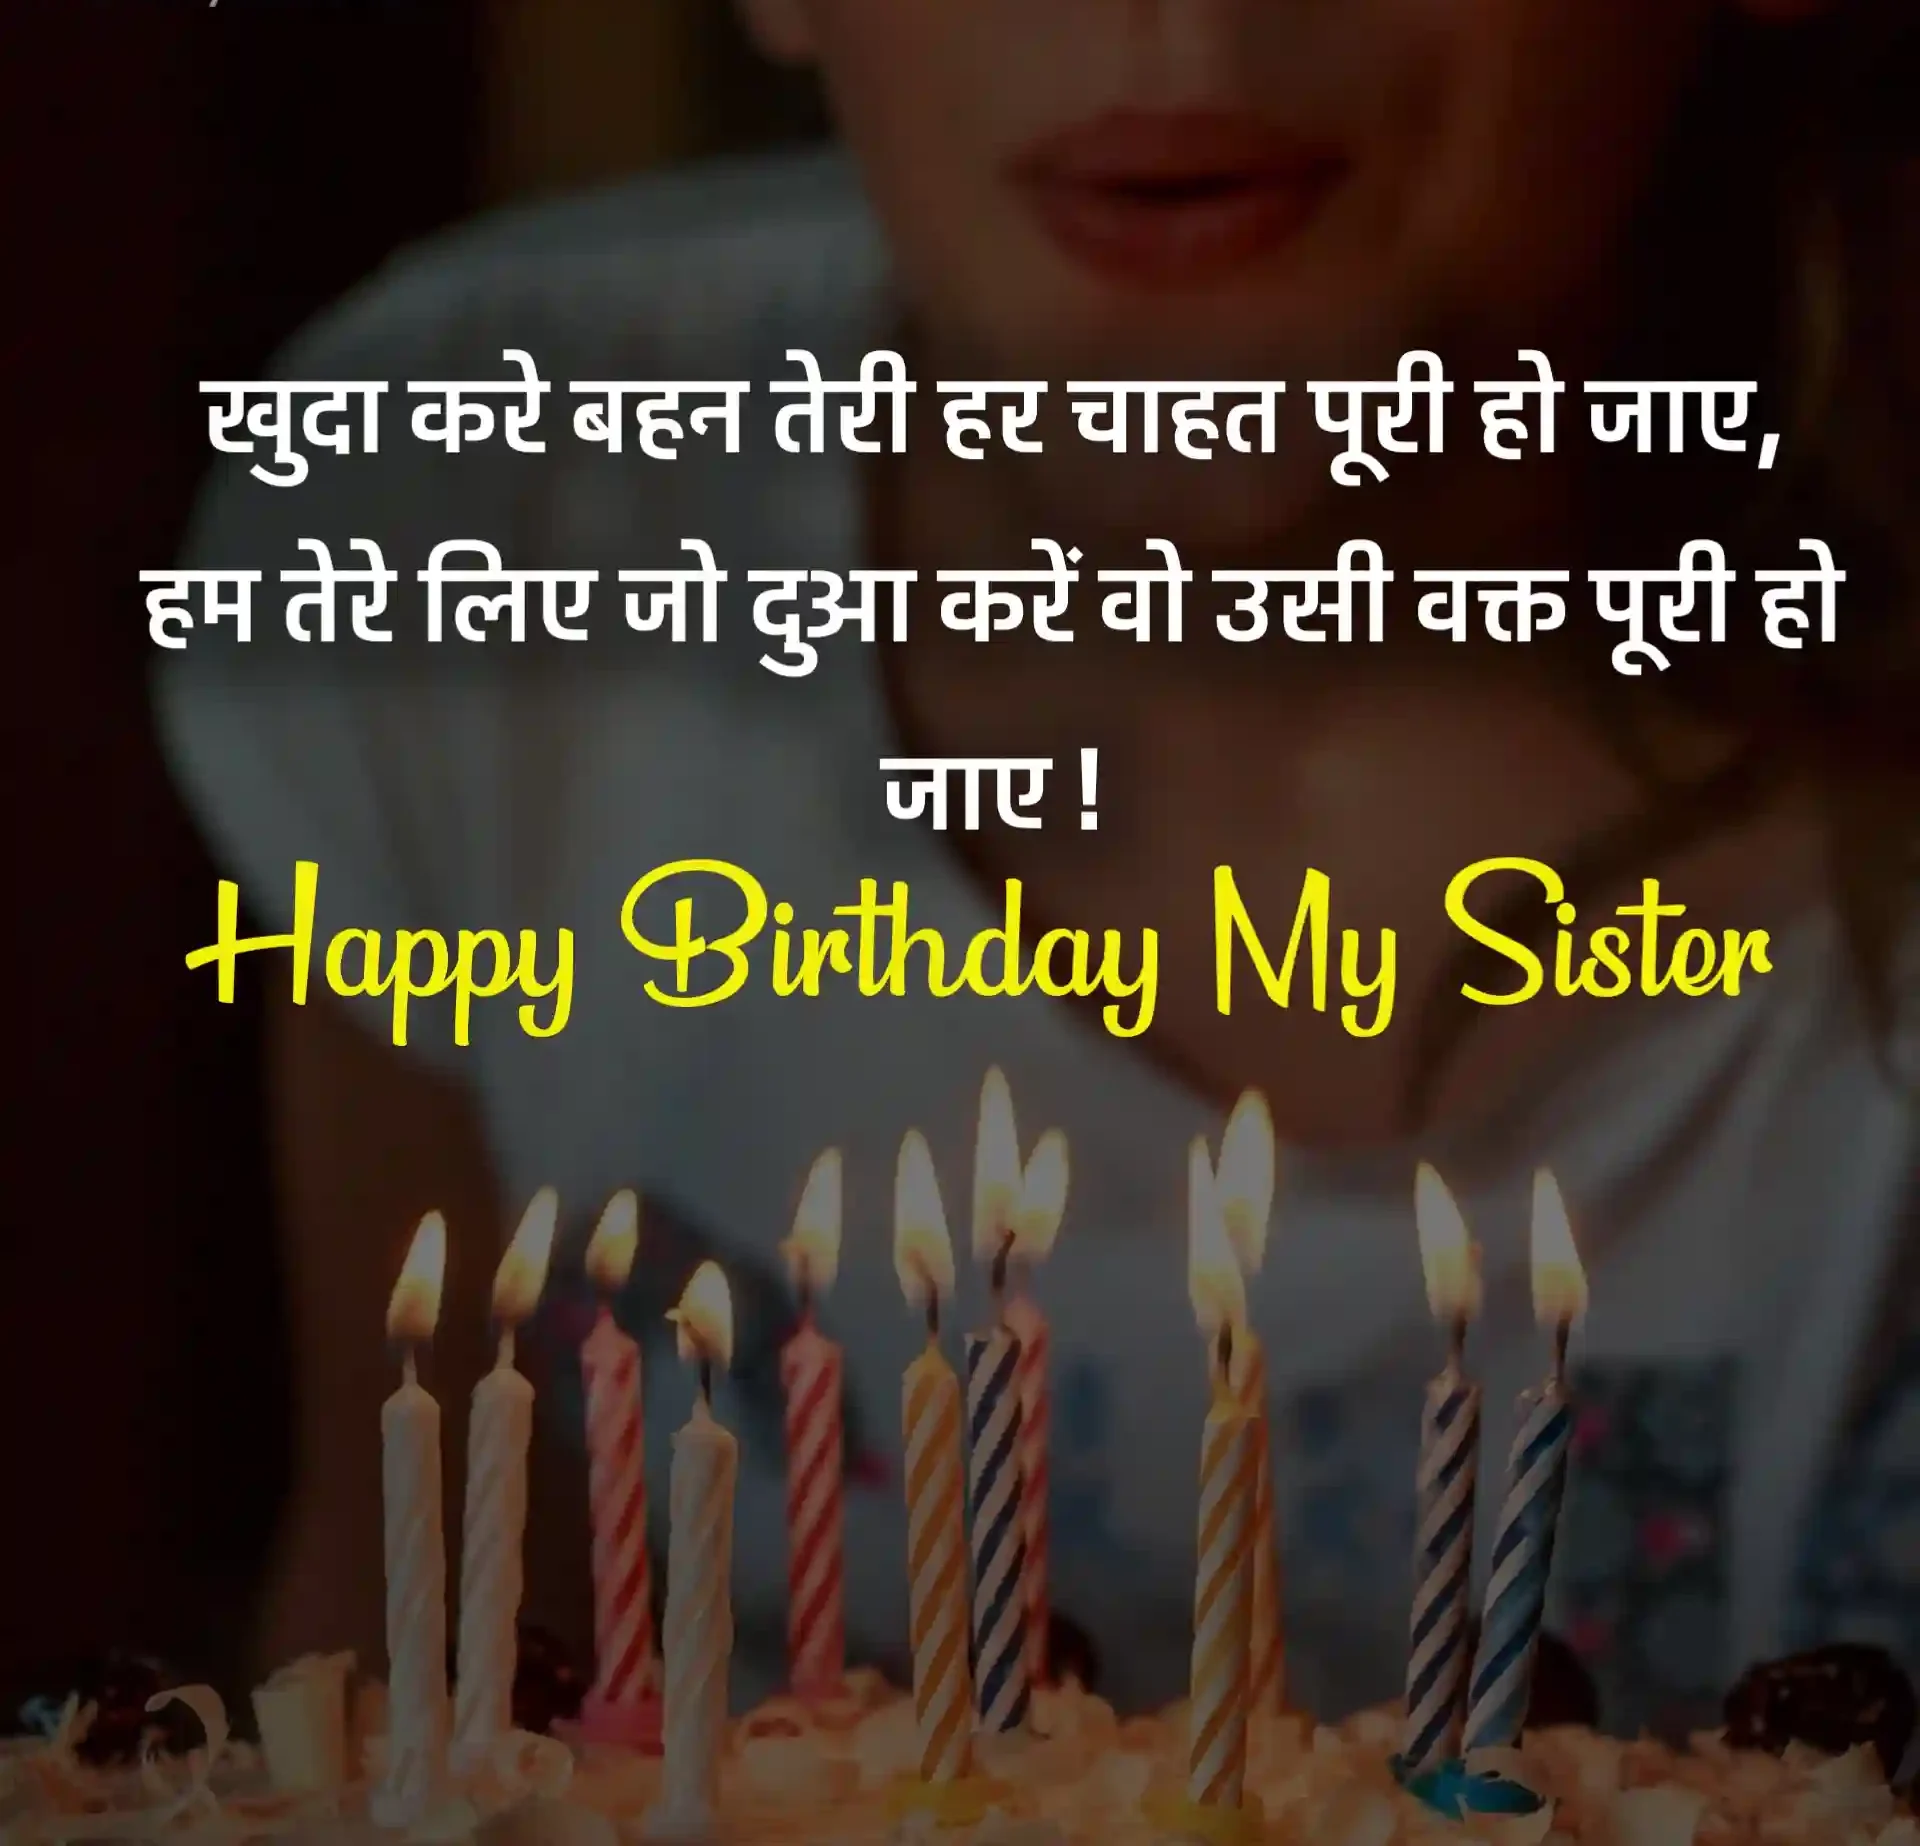 Birthday For Sister Wishes in Hindi